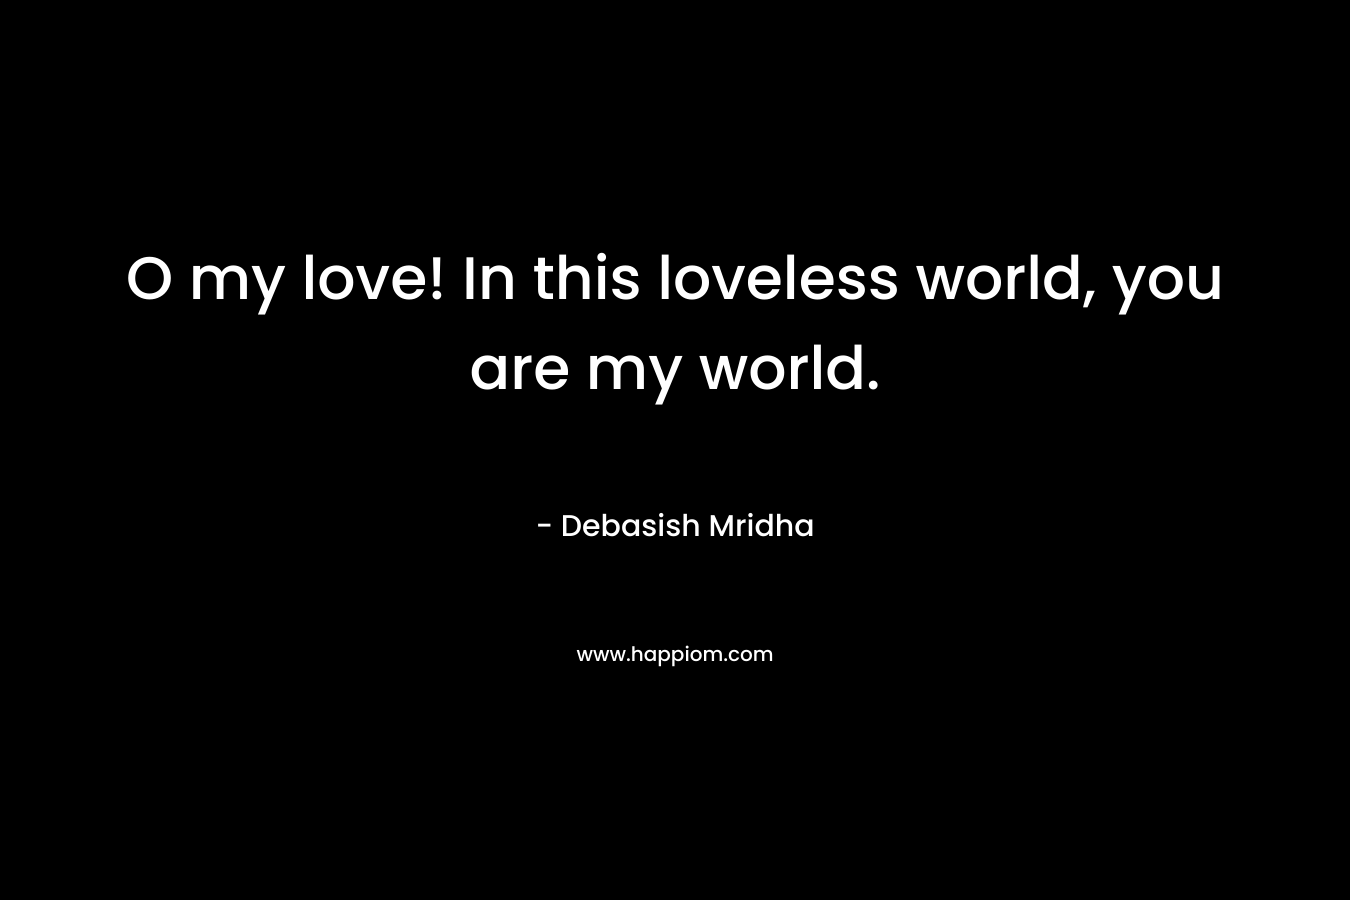 O my love! In this loveless world, you are my world.